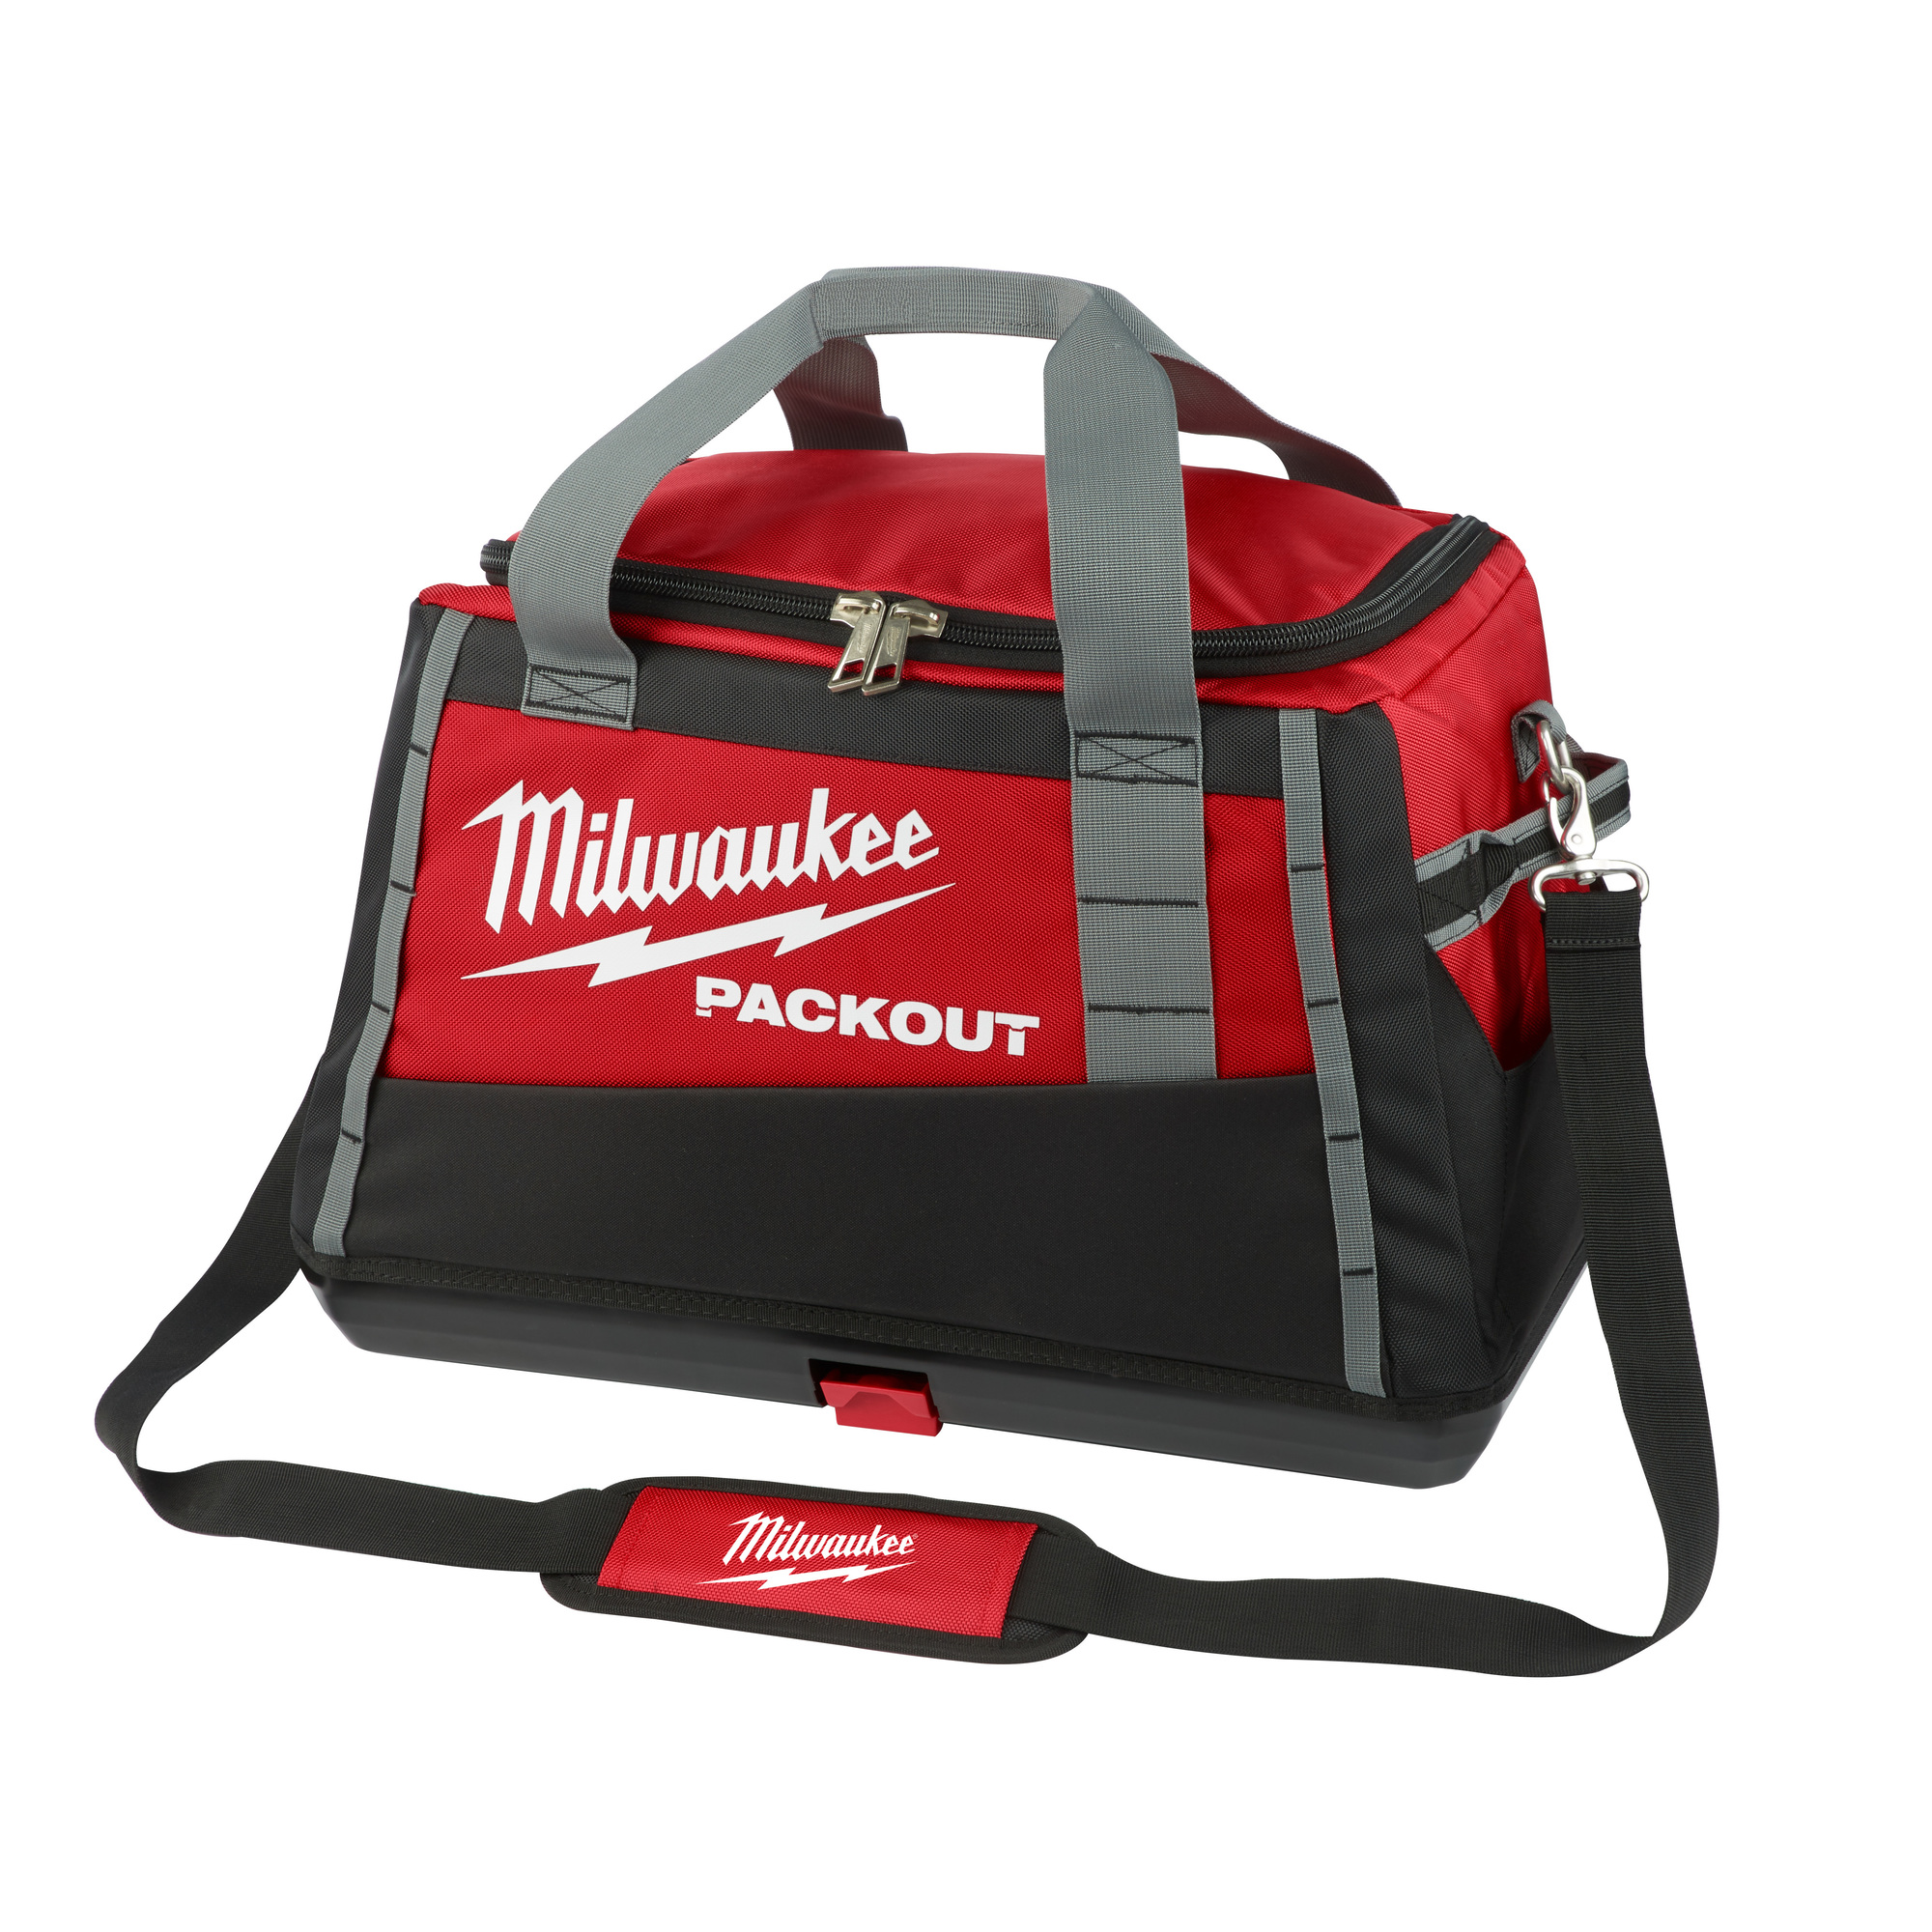 Milwaukee 20Inch Packout Tool Bag, 20Inch W x 12 1/4Inch D x 13 13/16Inch H, Model 48-22-8322